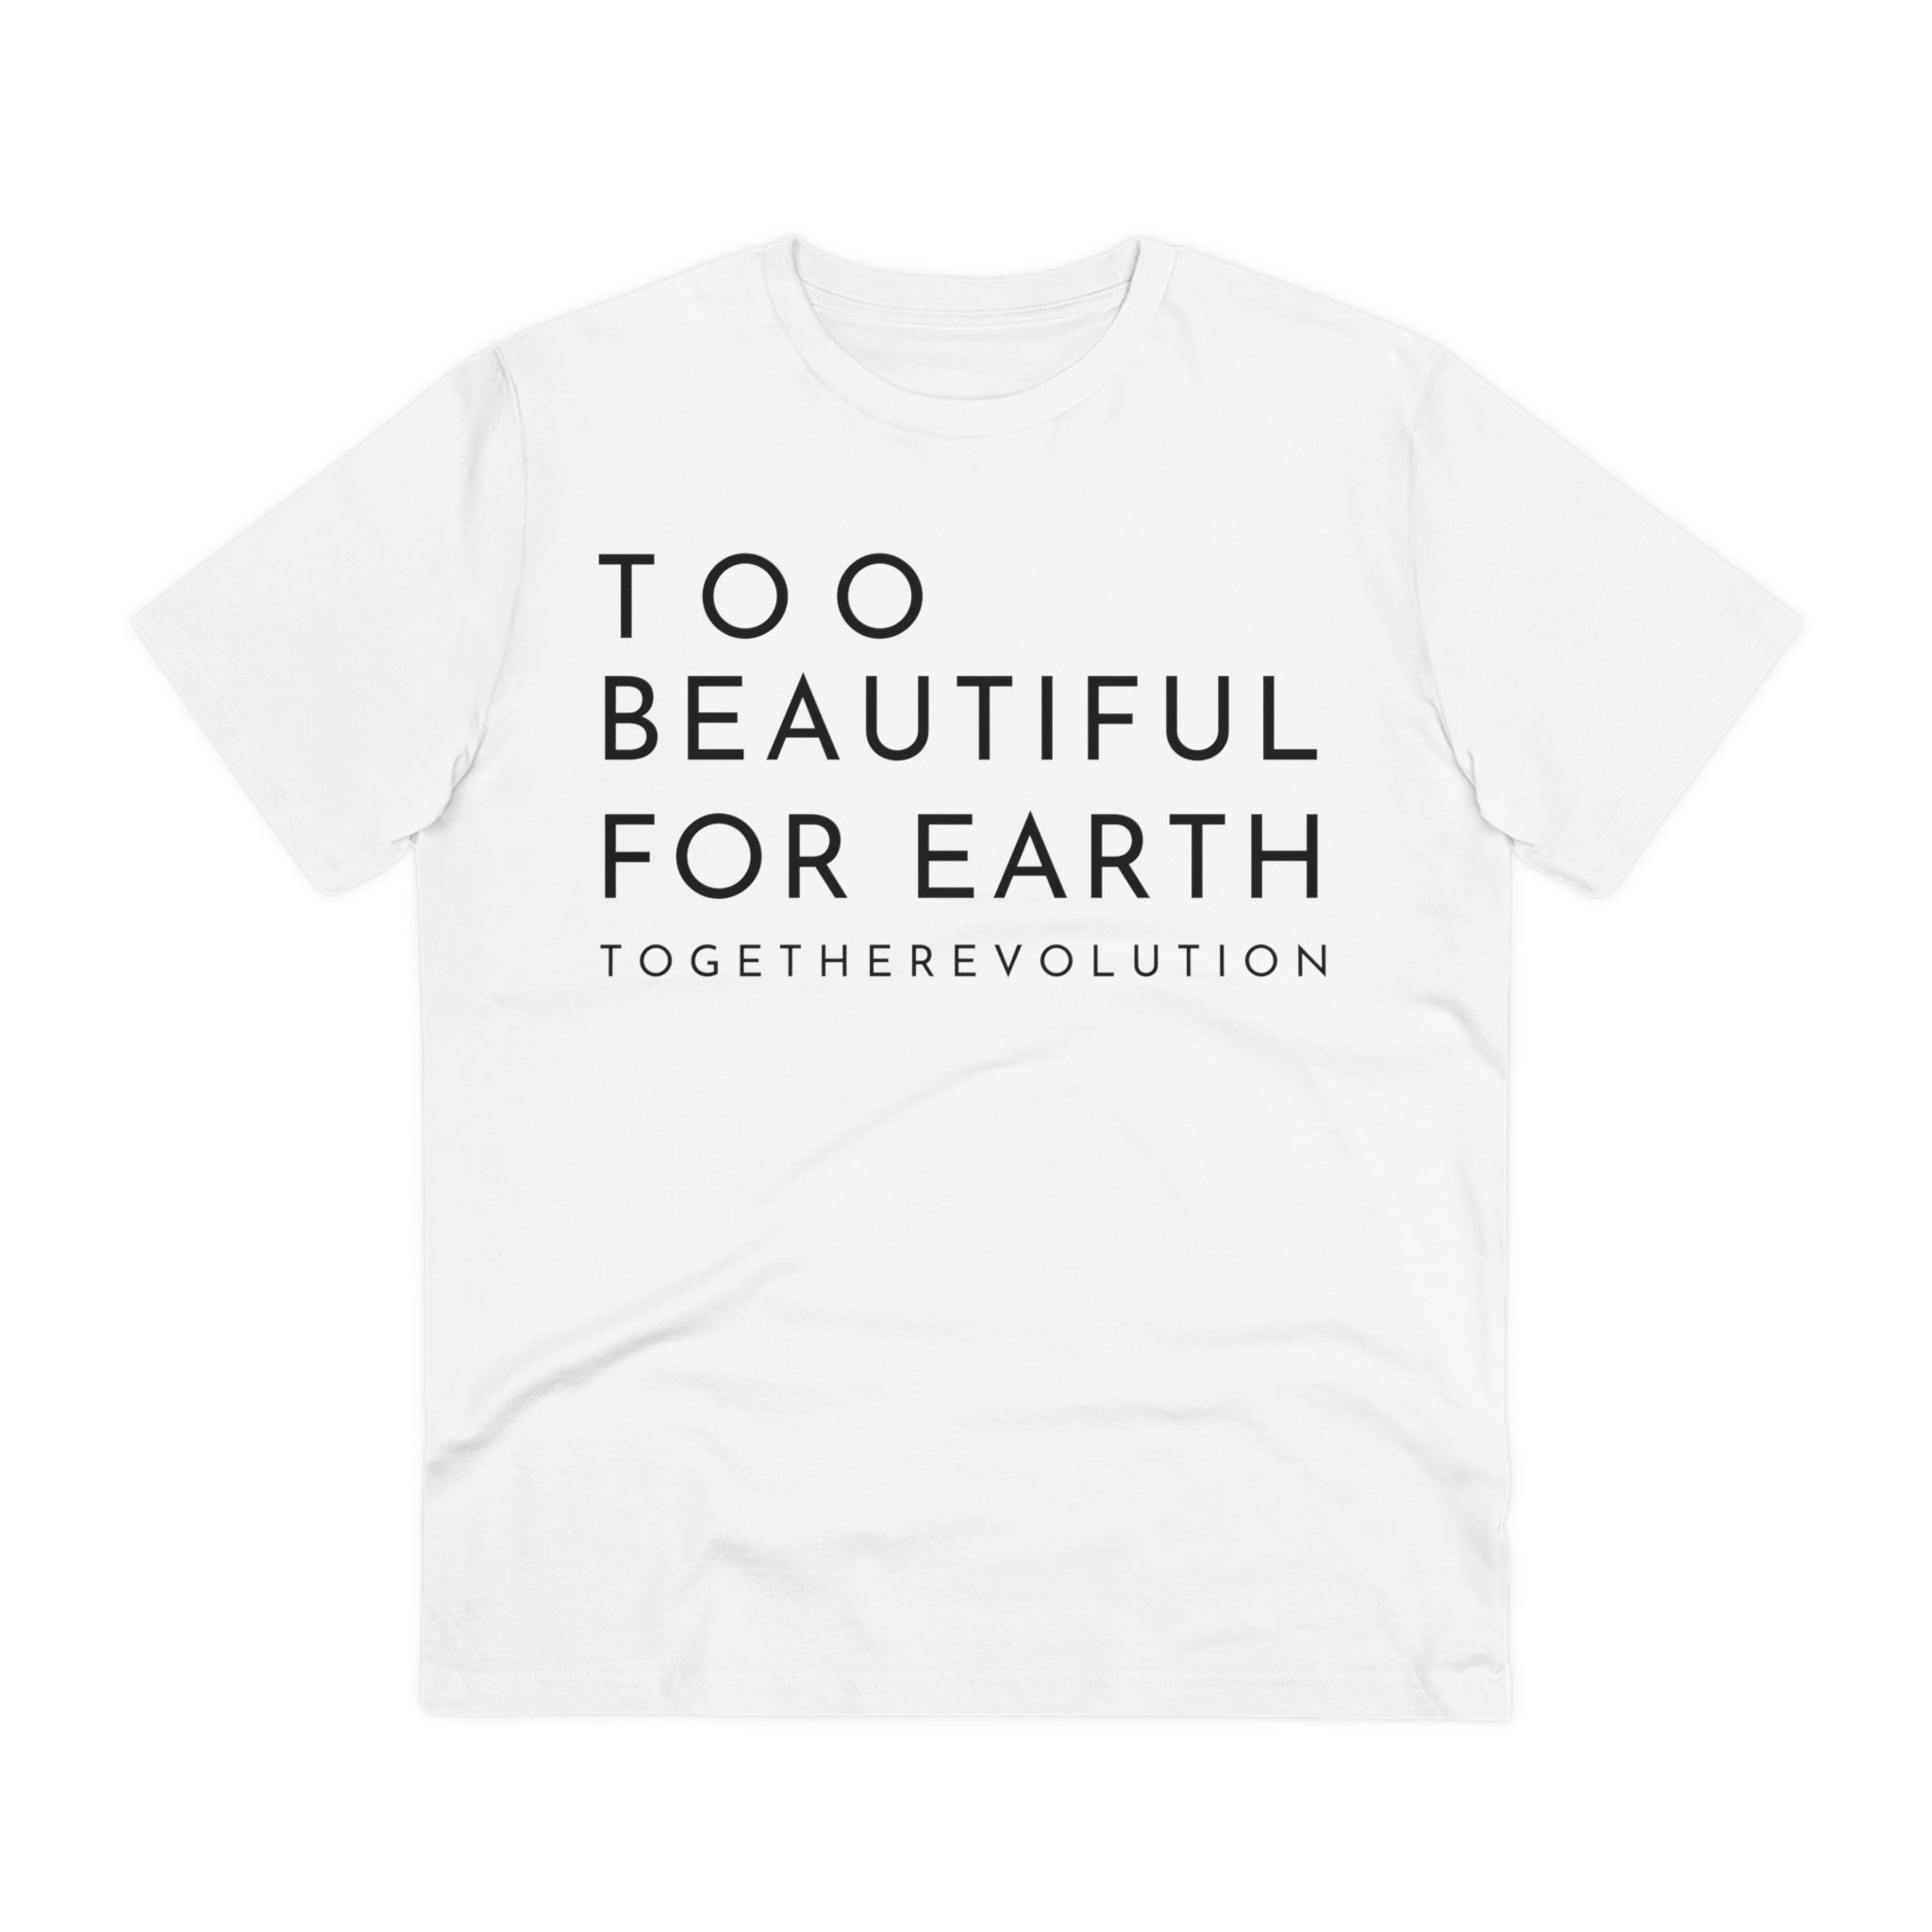 Too Beautiful For Earth